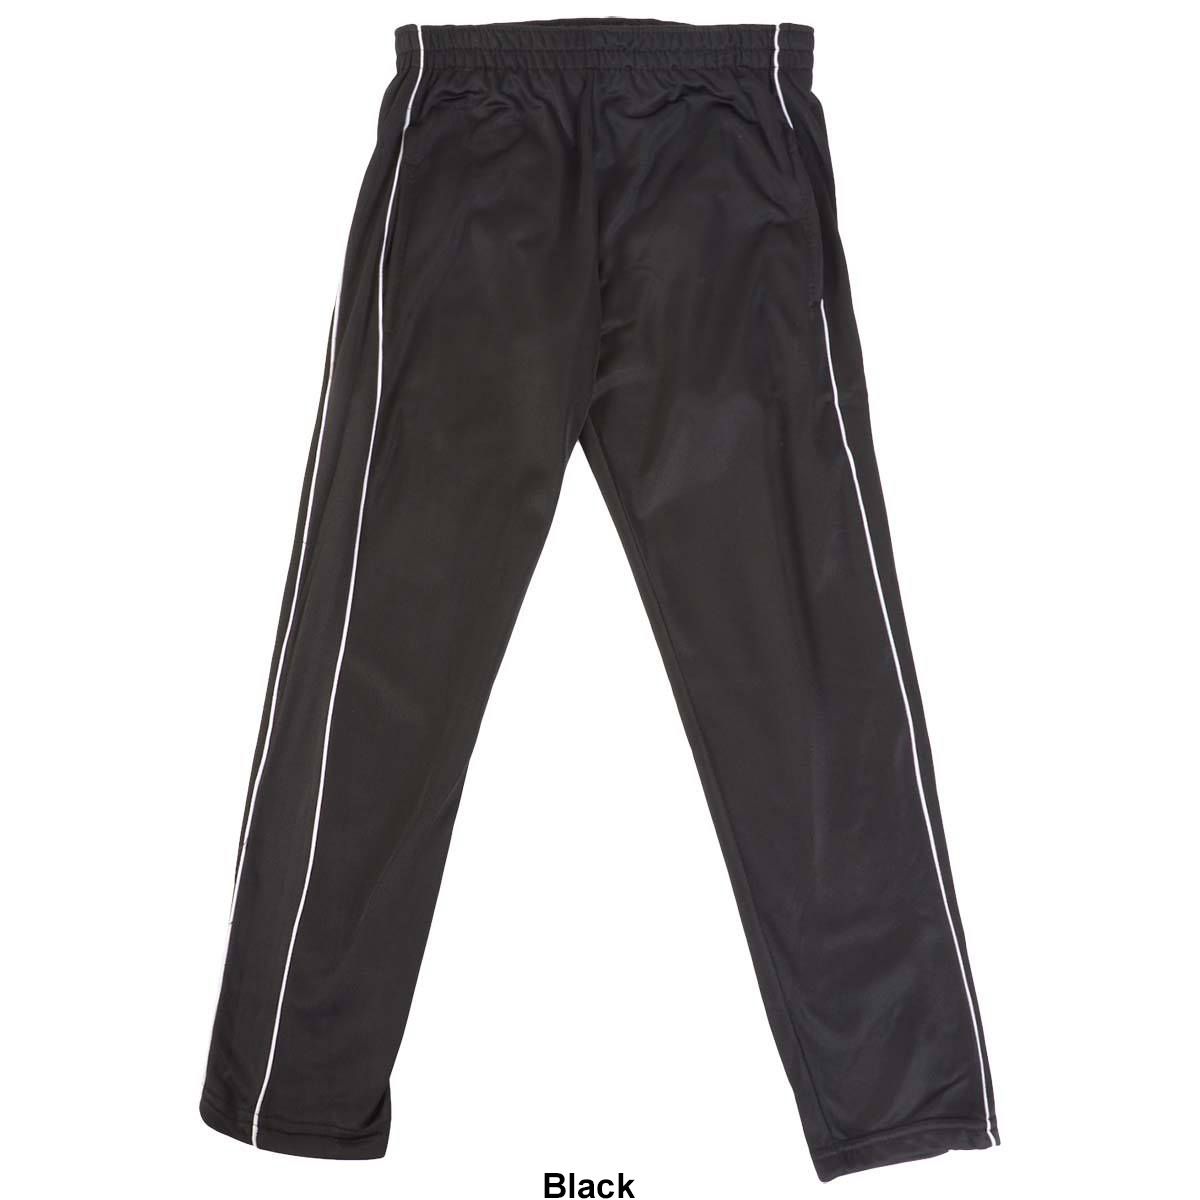 Boys (8-20) Starting Point Tricot Pants